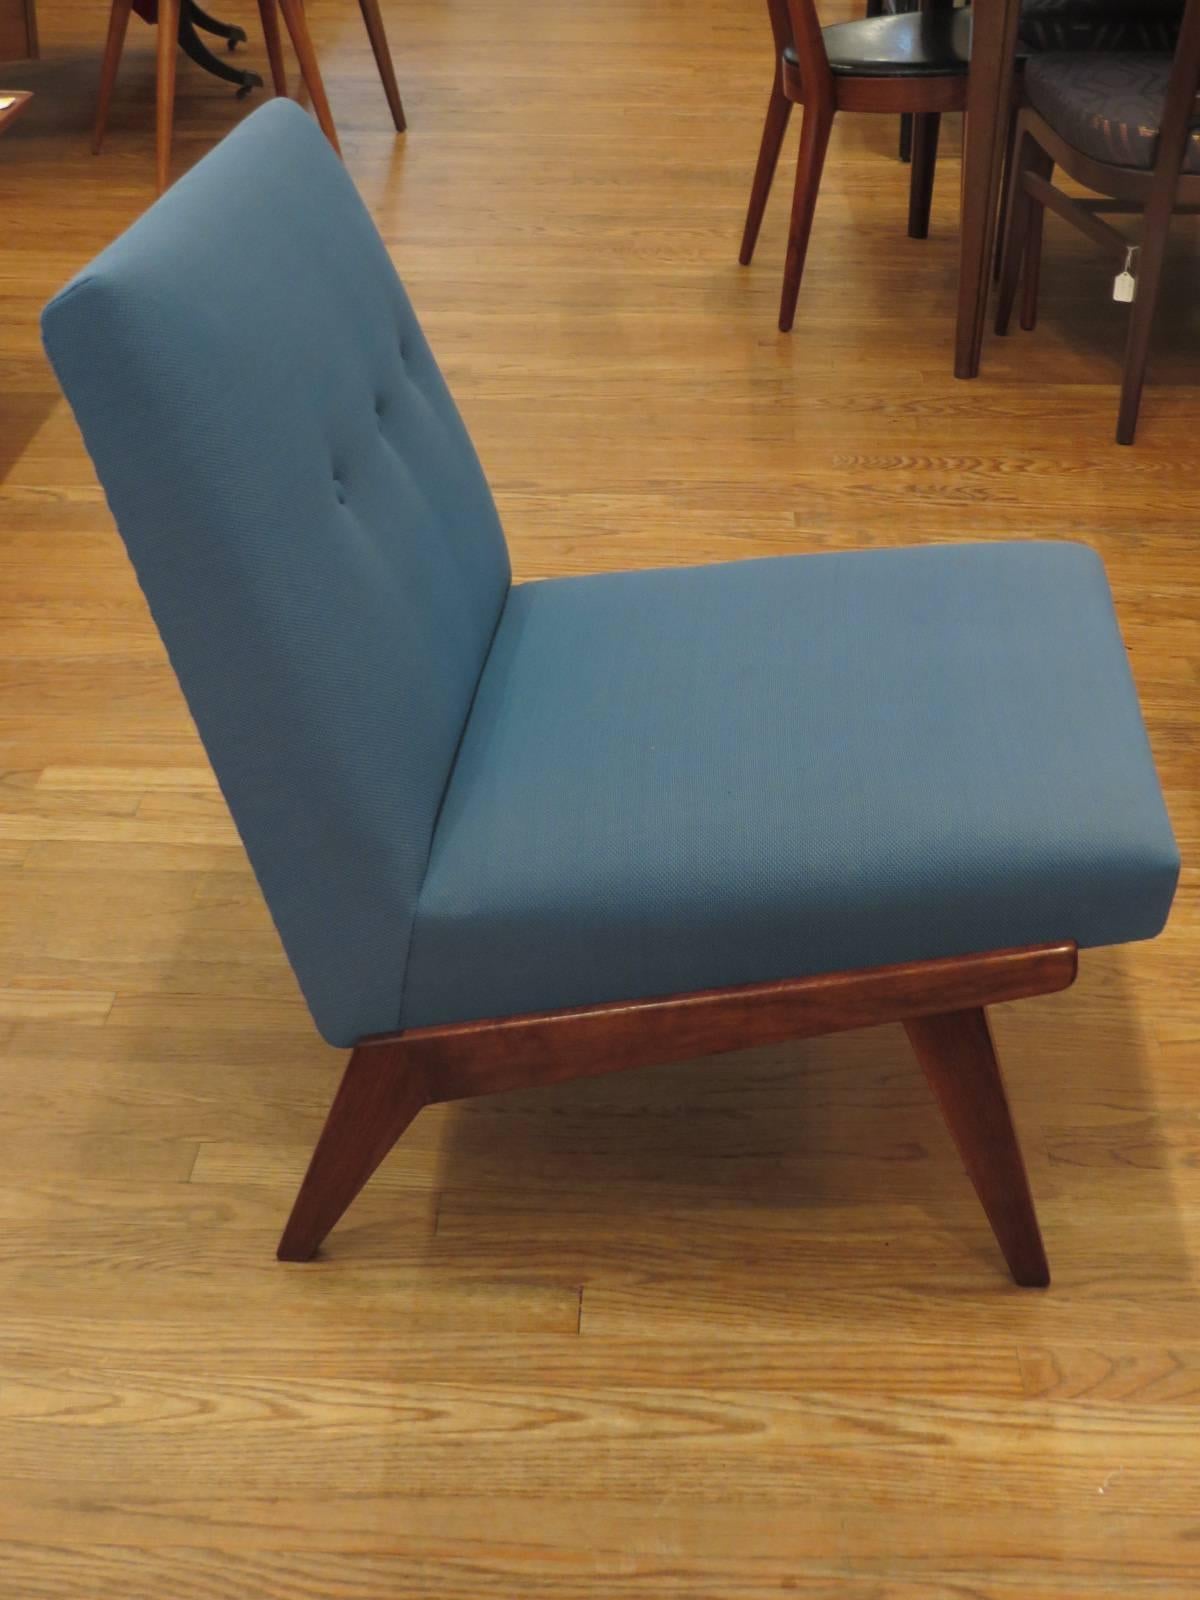 Lounge chair by Jens Risom, in excellent vintage condition.